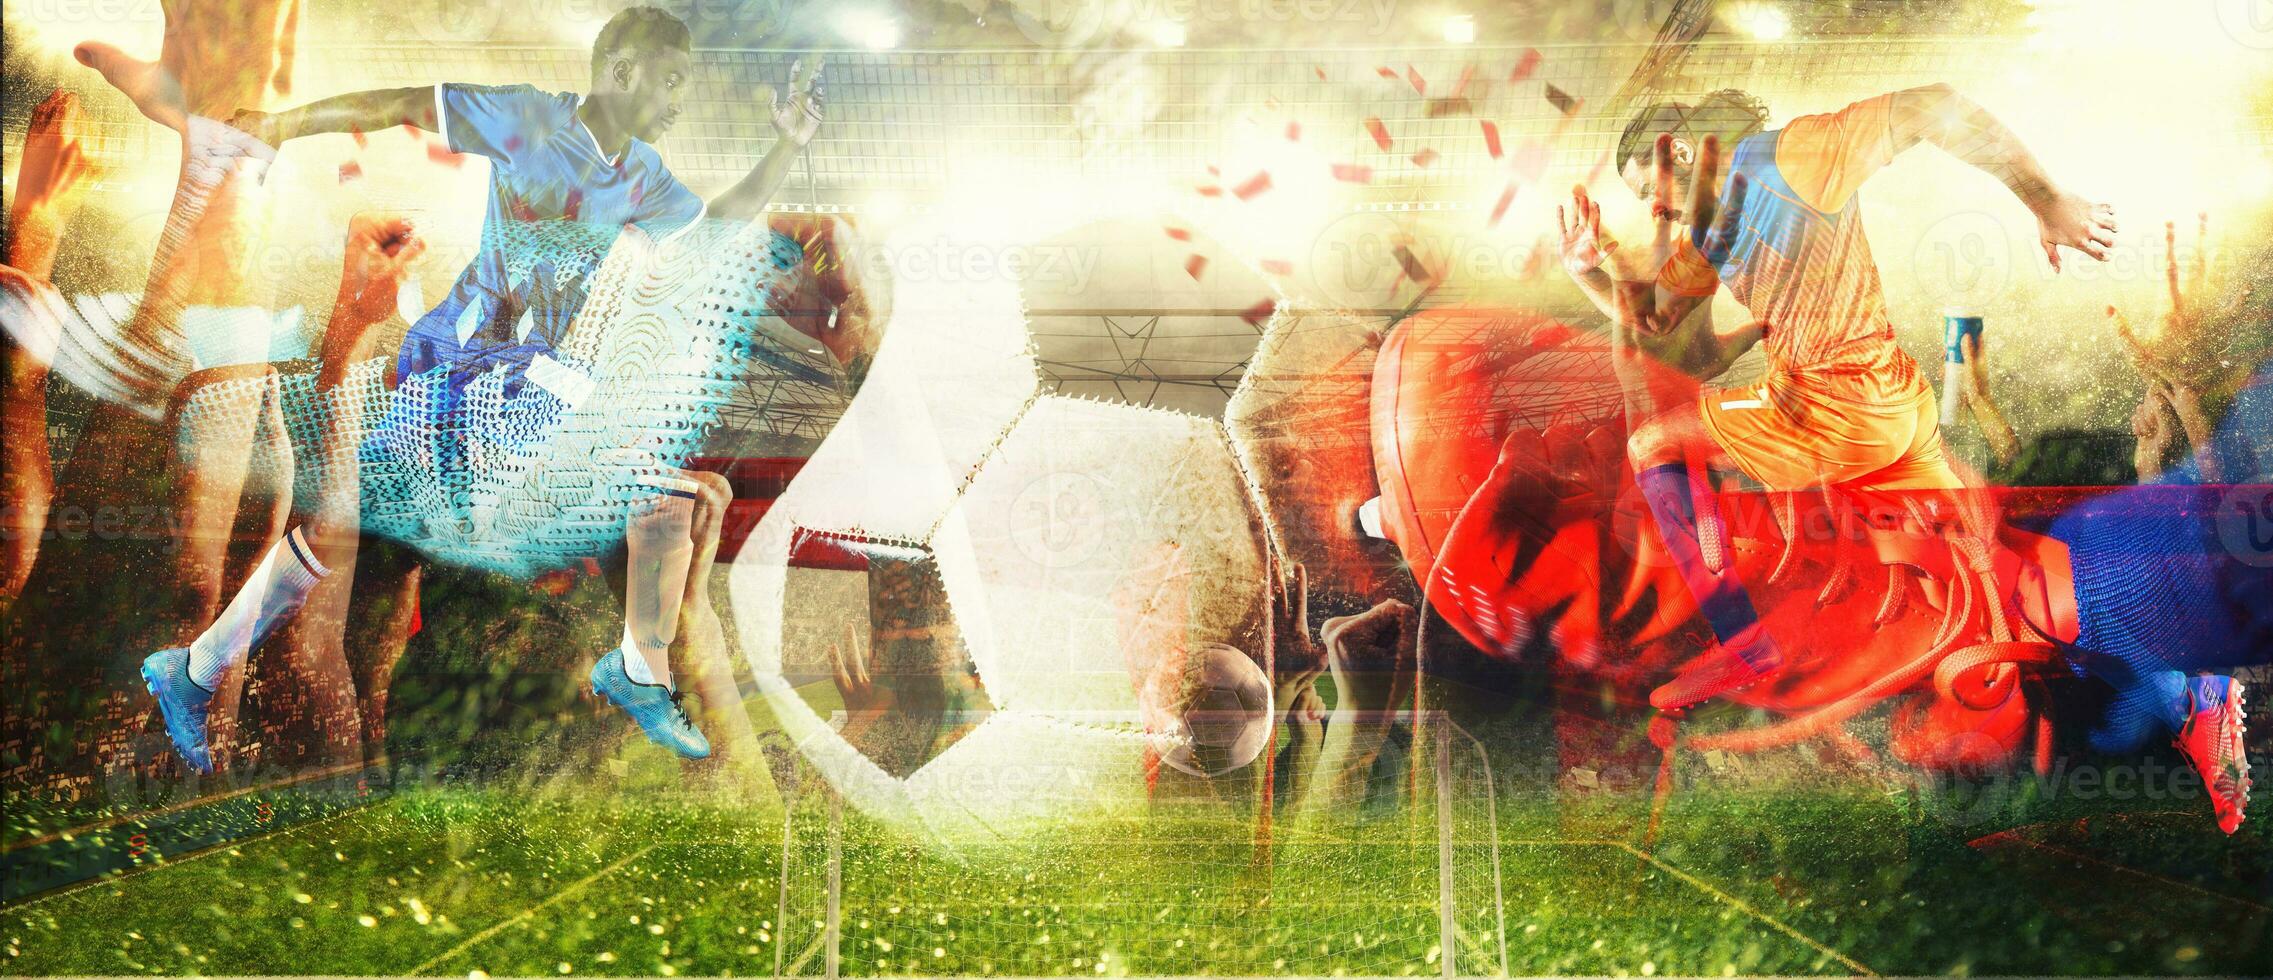 Double exposure soccer background with two soccer players and stadium photo